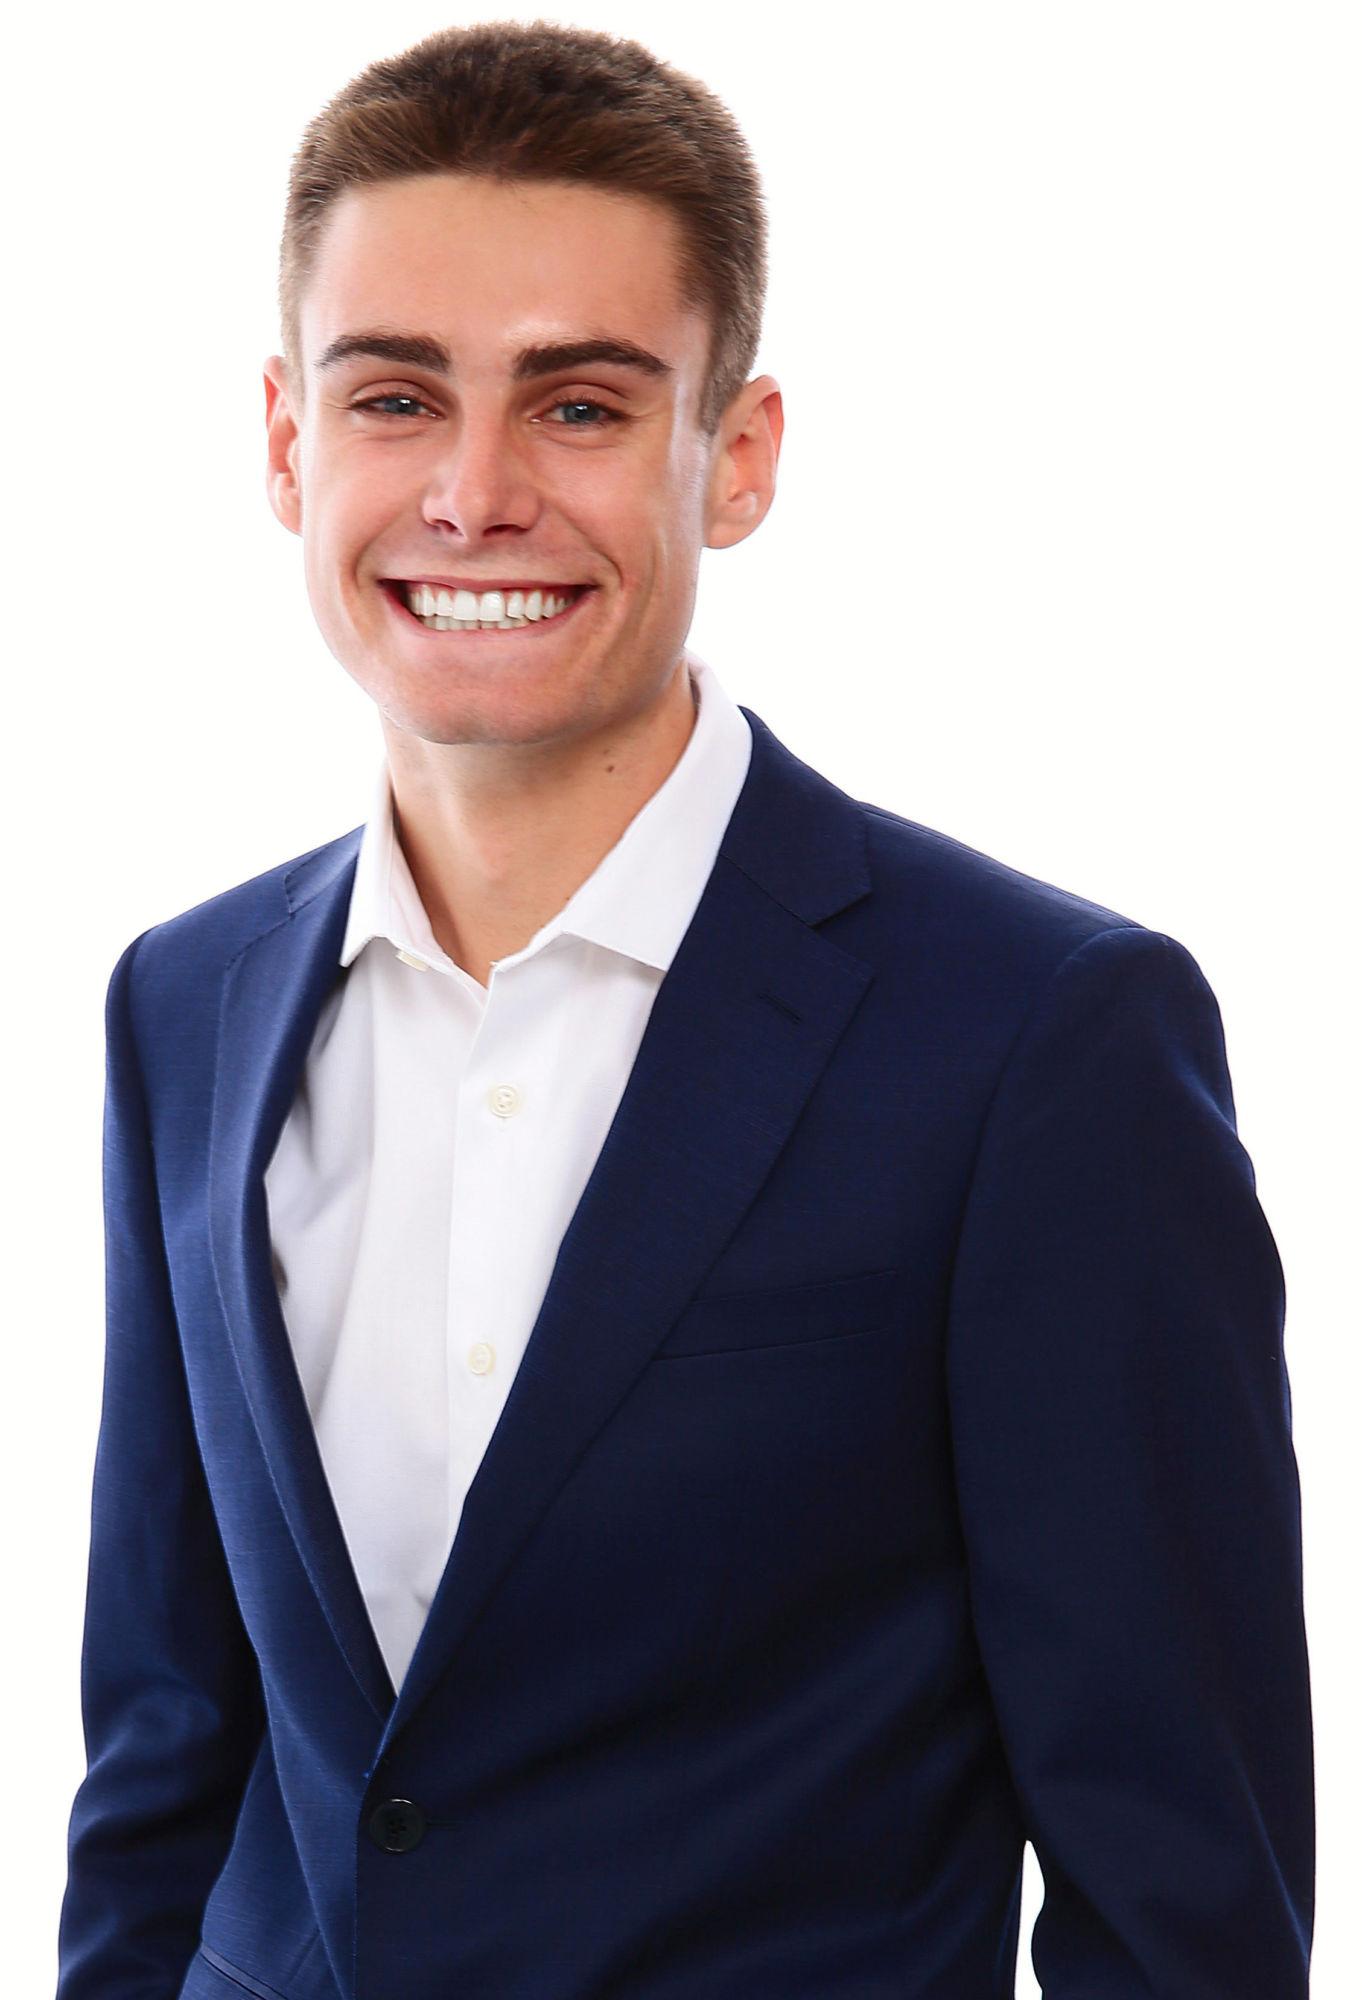 Since graduating from Redwood in 2016, Daly has become one of California's youngest real estate agents. He said in a few years he also hopes to be one of the top agents in the state.